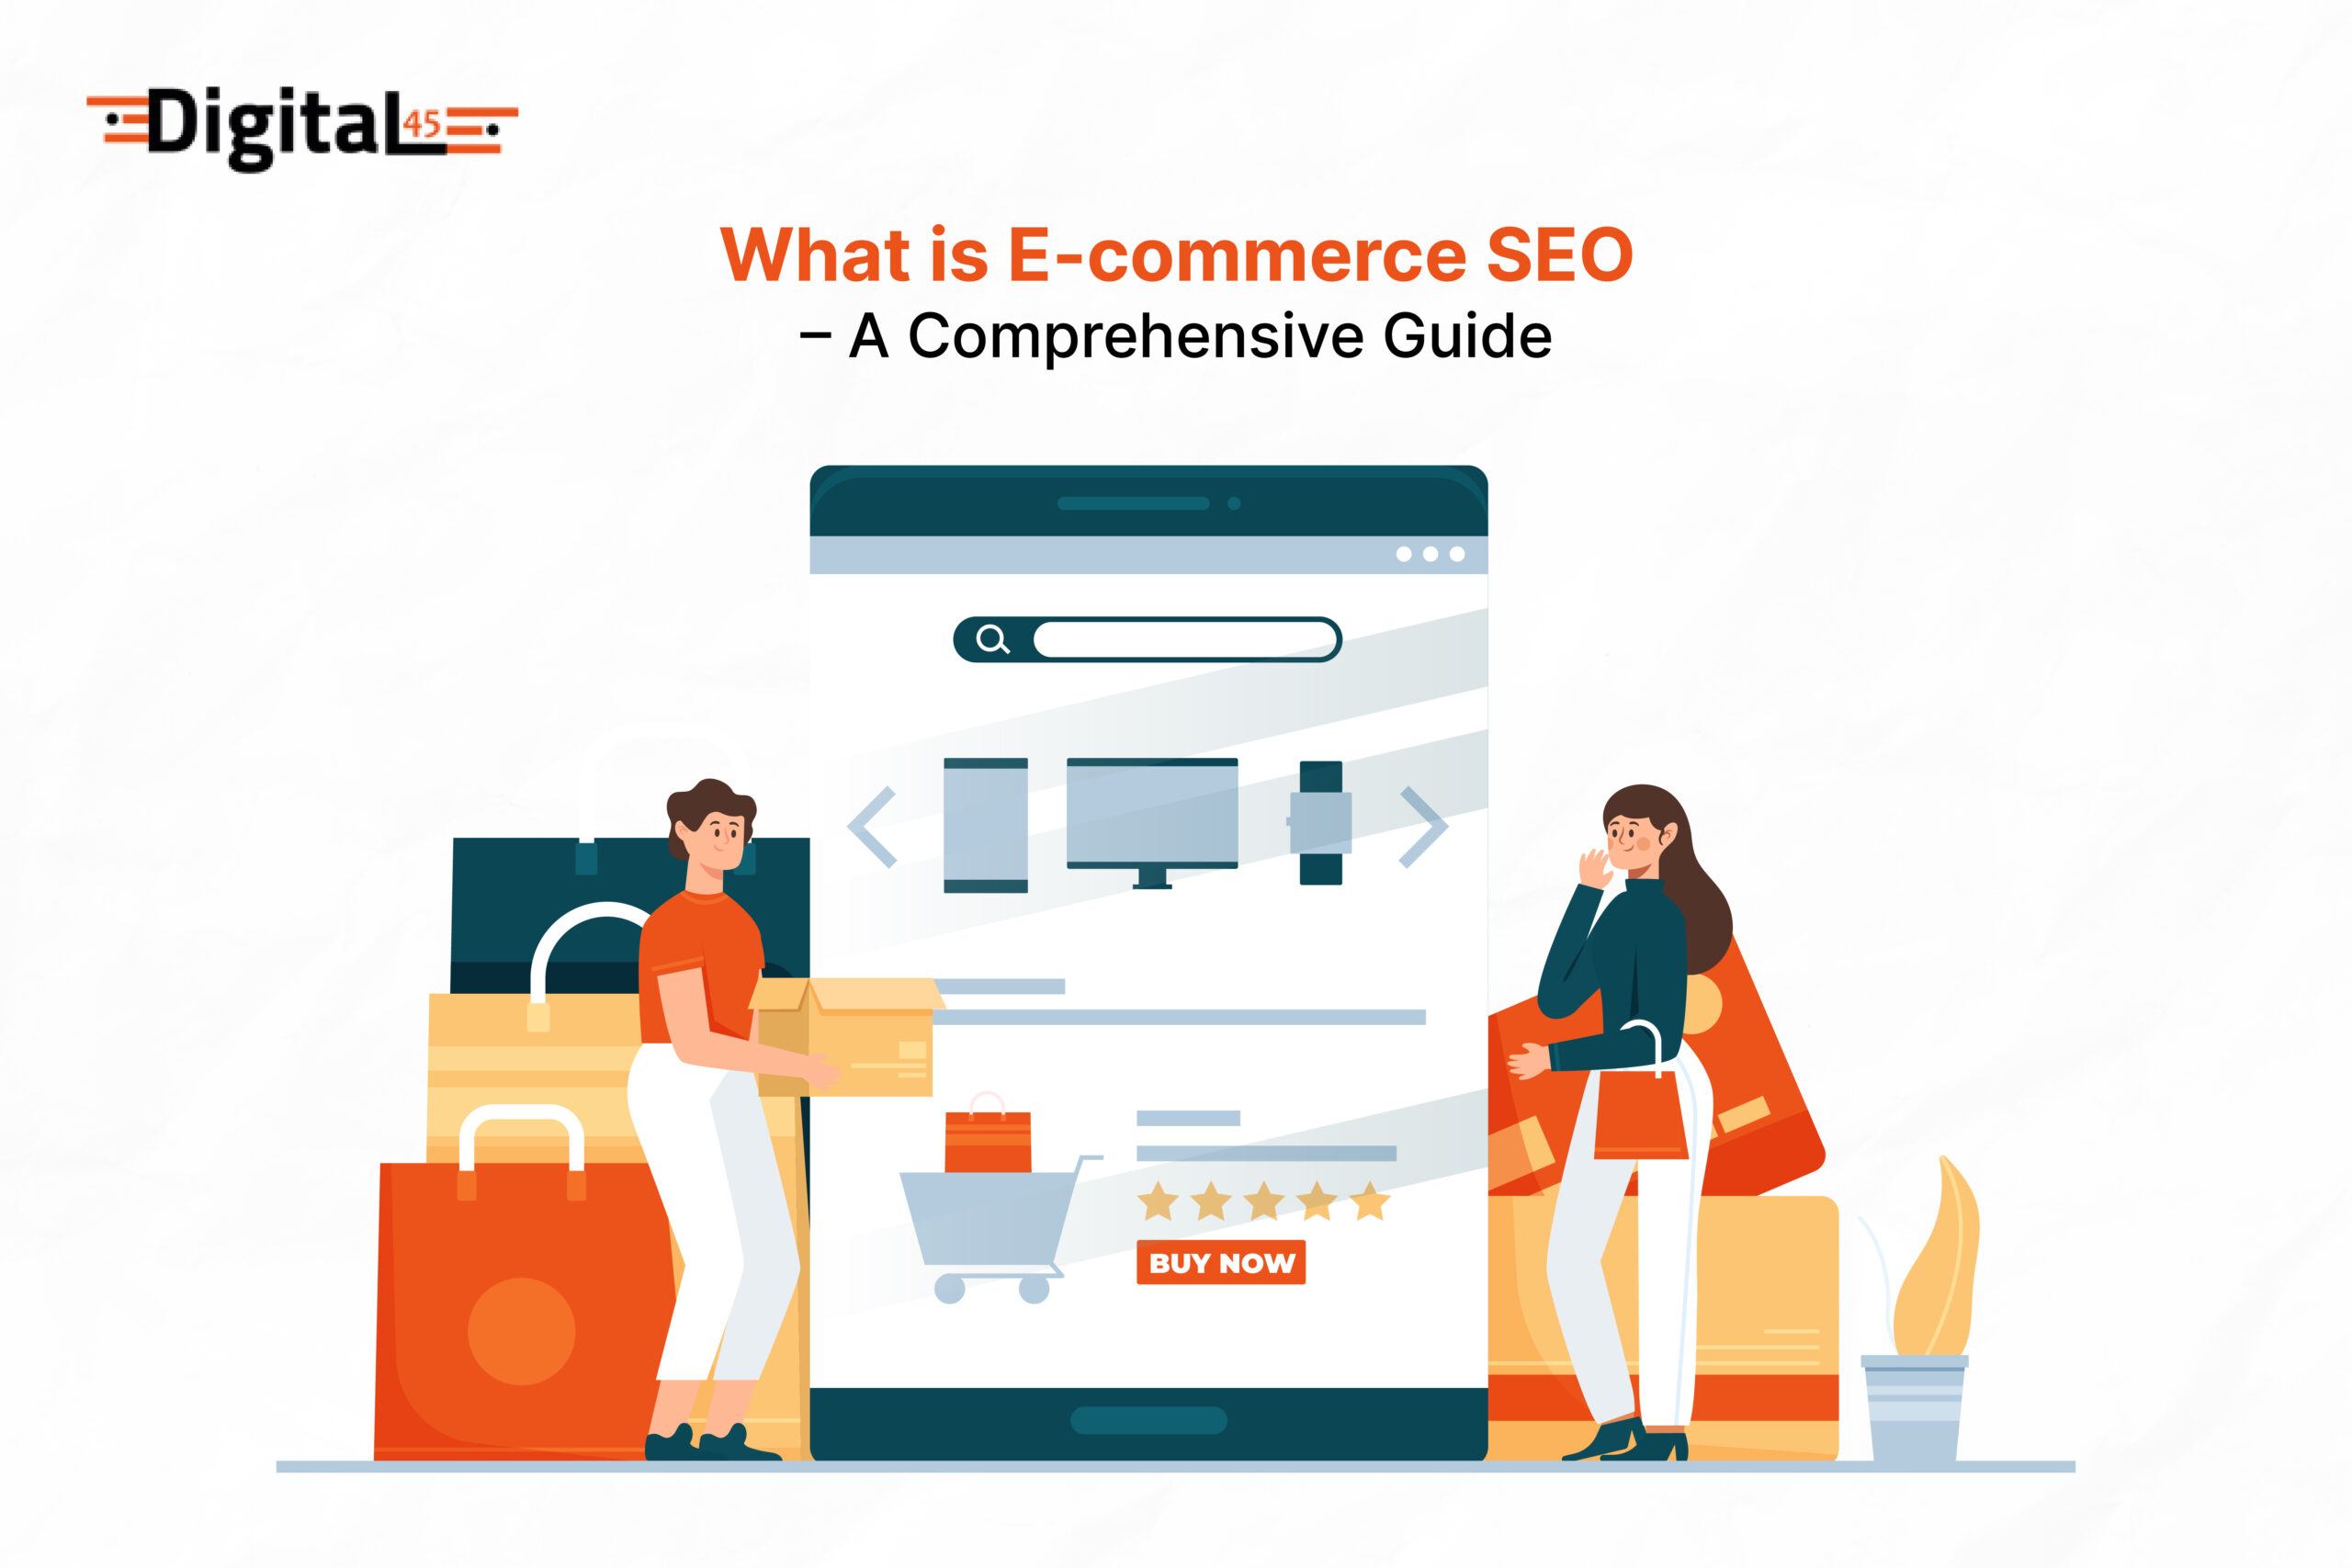 What is E-commerce SEO?